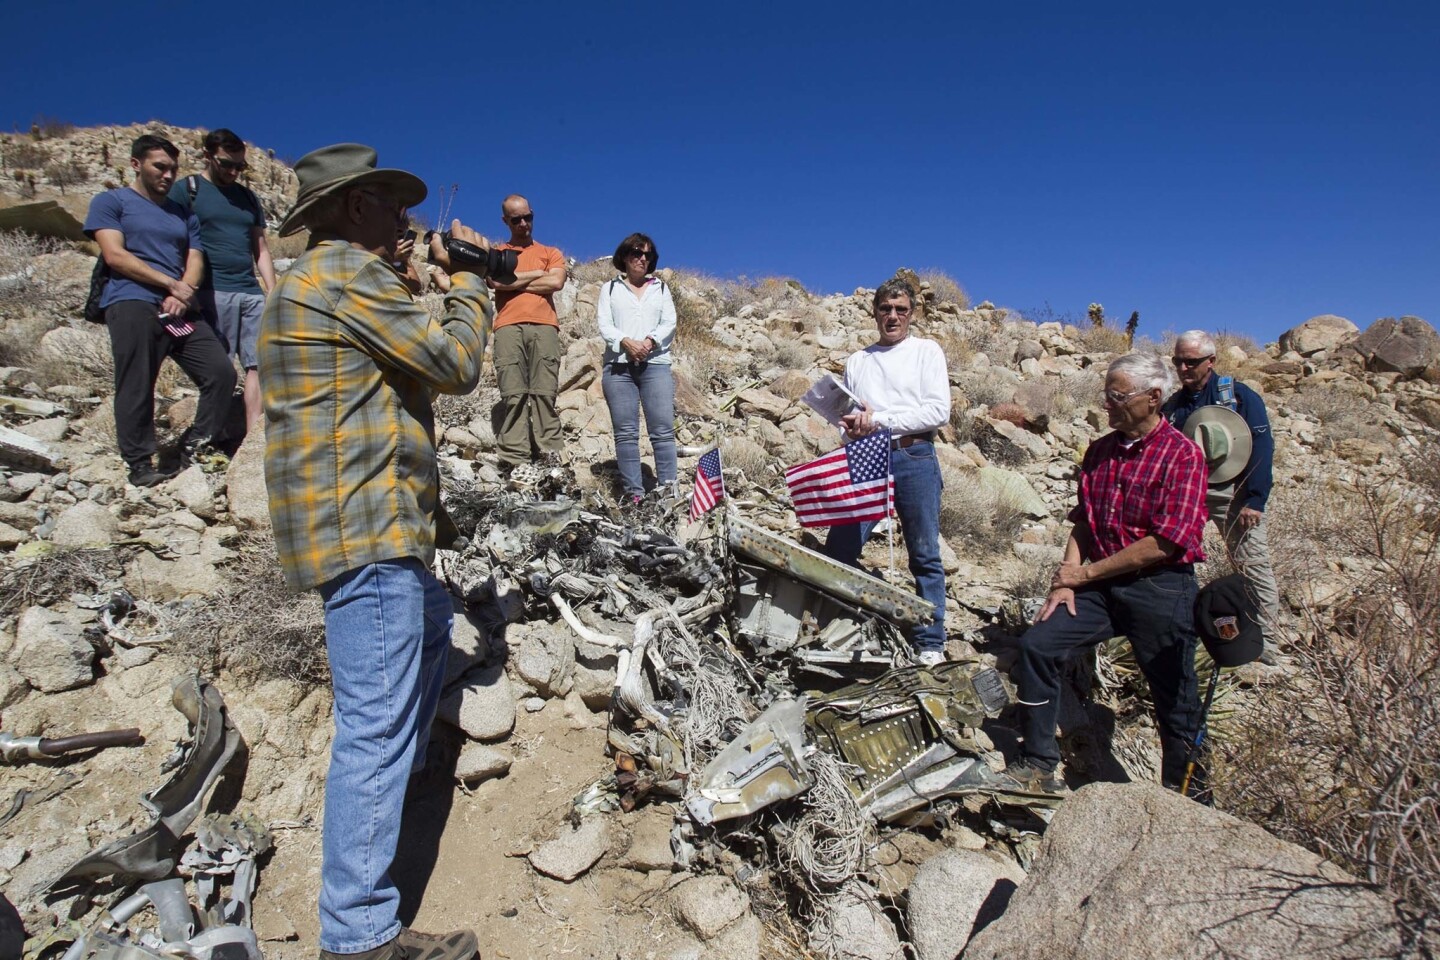 Bruce Guberman, with Project Remembrance, videotaped as the family haled a memorial at the exact time 50 years ago when the pilot crashed into the desert. The placed a lidded glass bottle amongst the wreckage so that if people come across the site while hiking they will have an idea of what happened there.